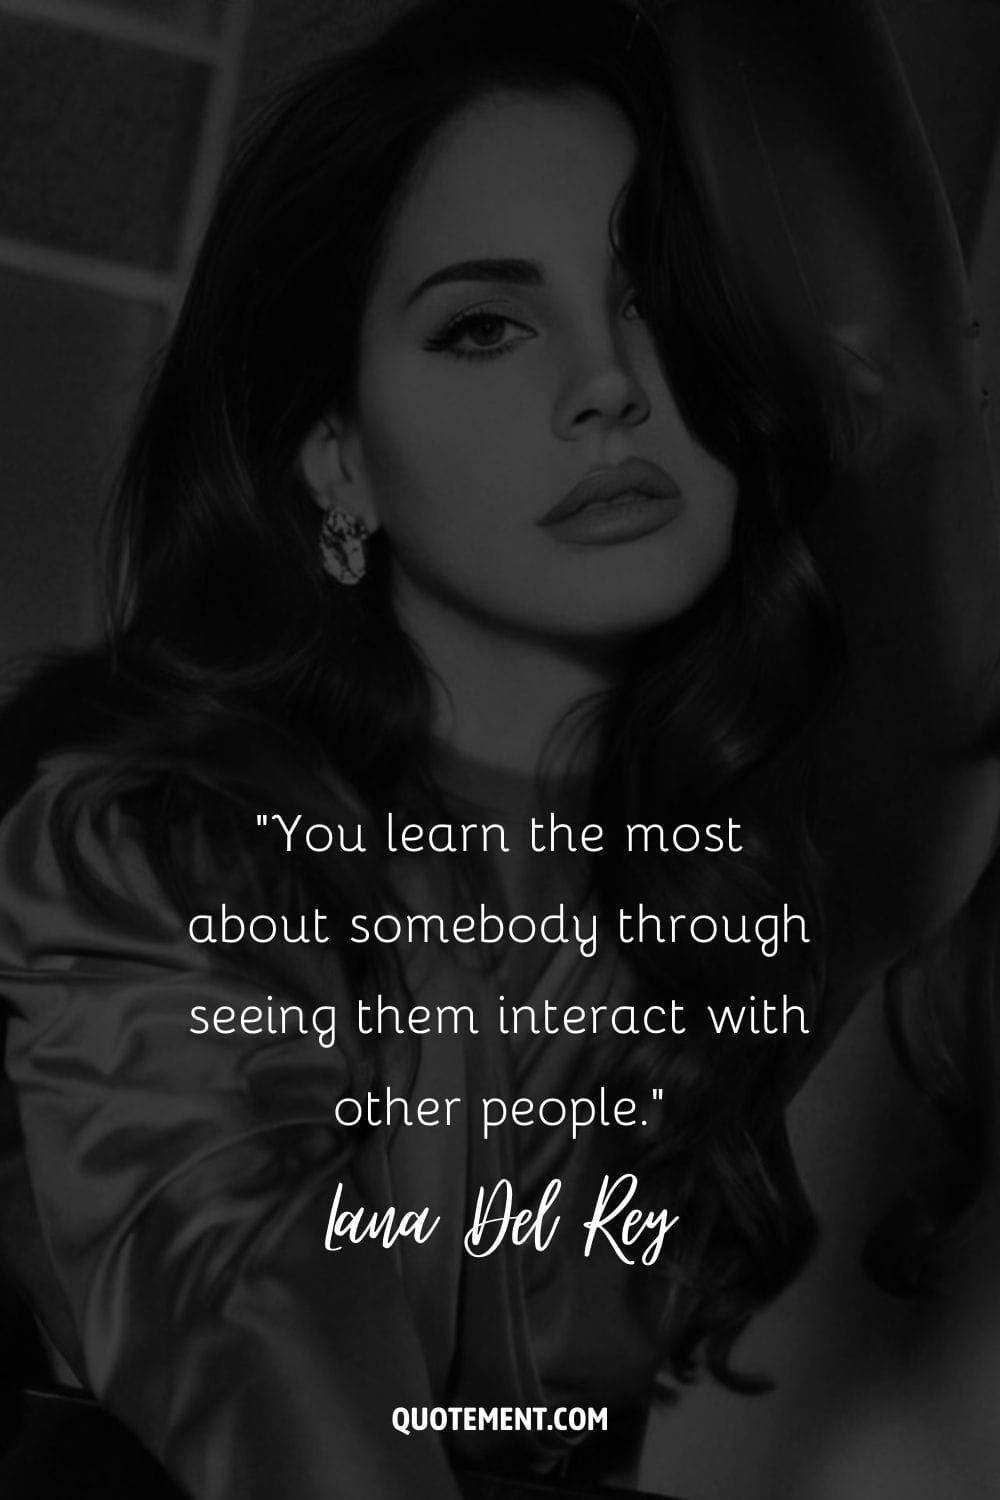 You learn the most about somebody through seeing them interact with other people